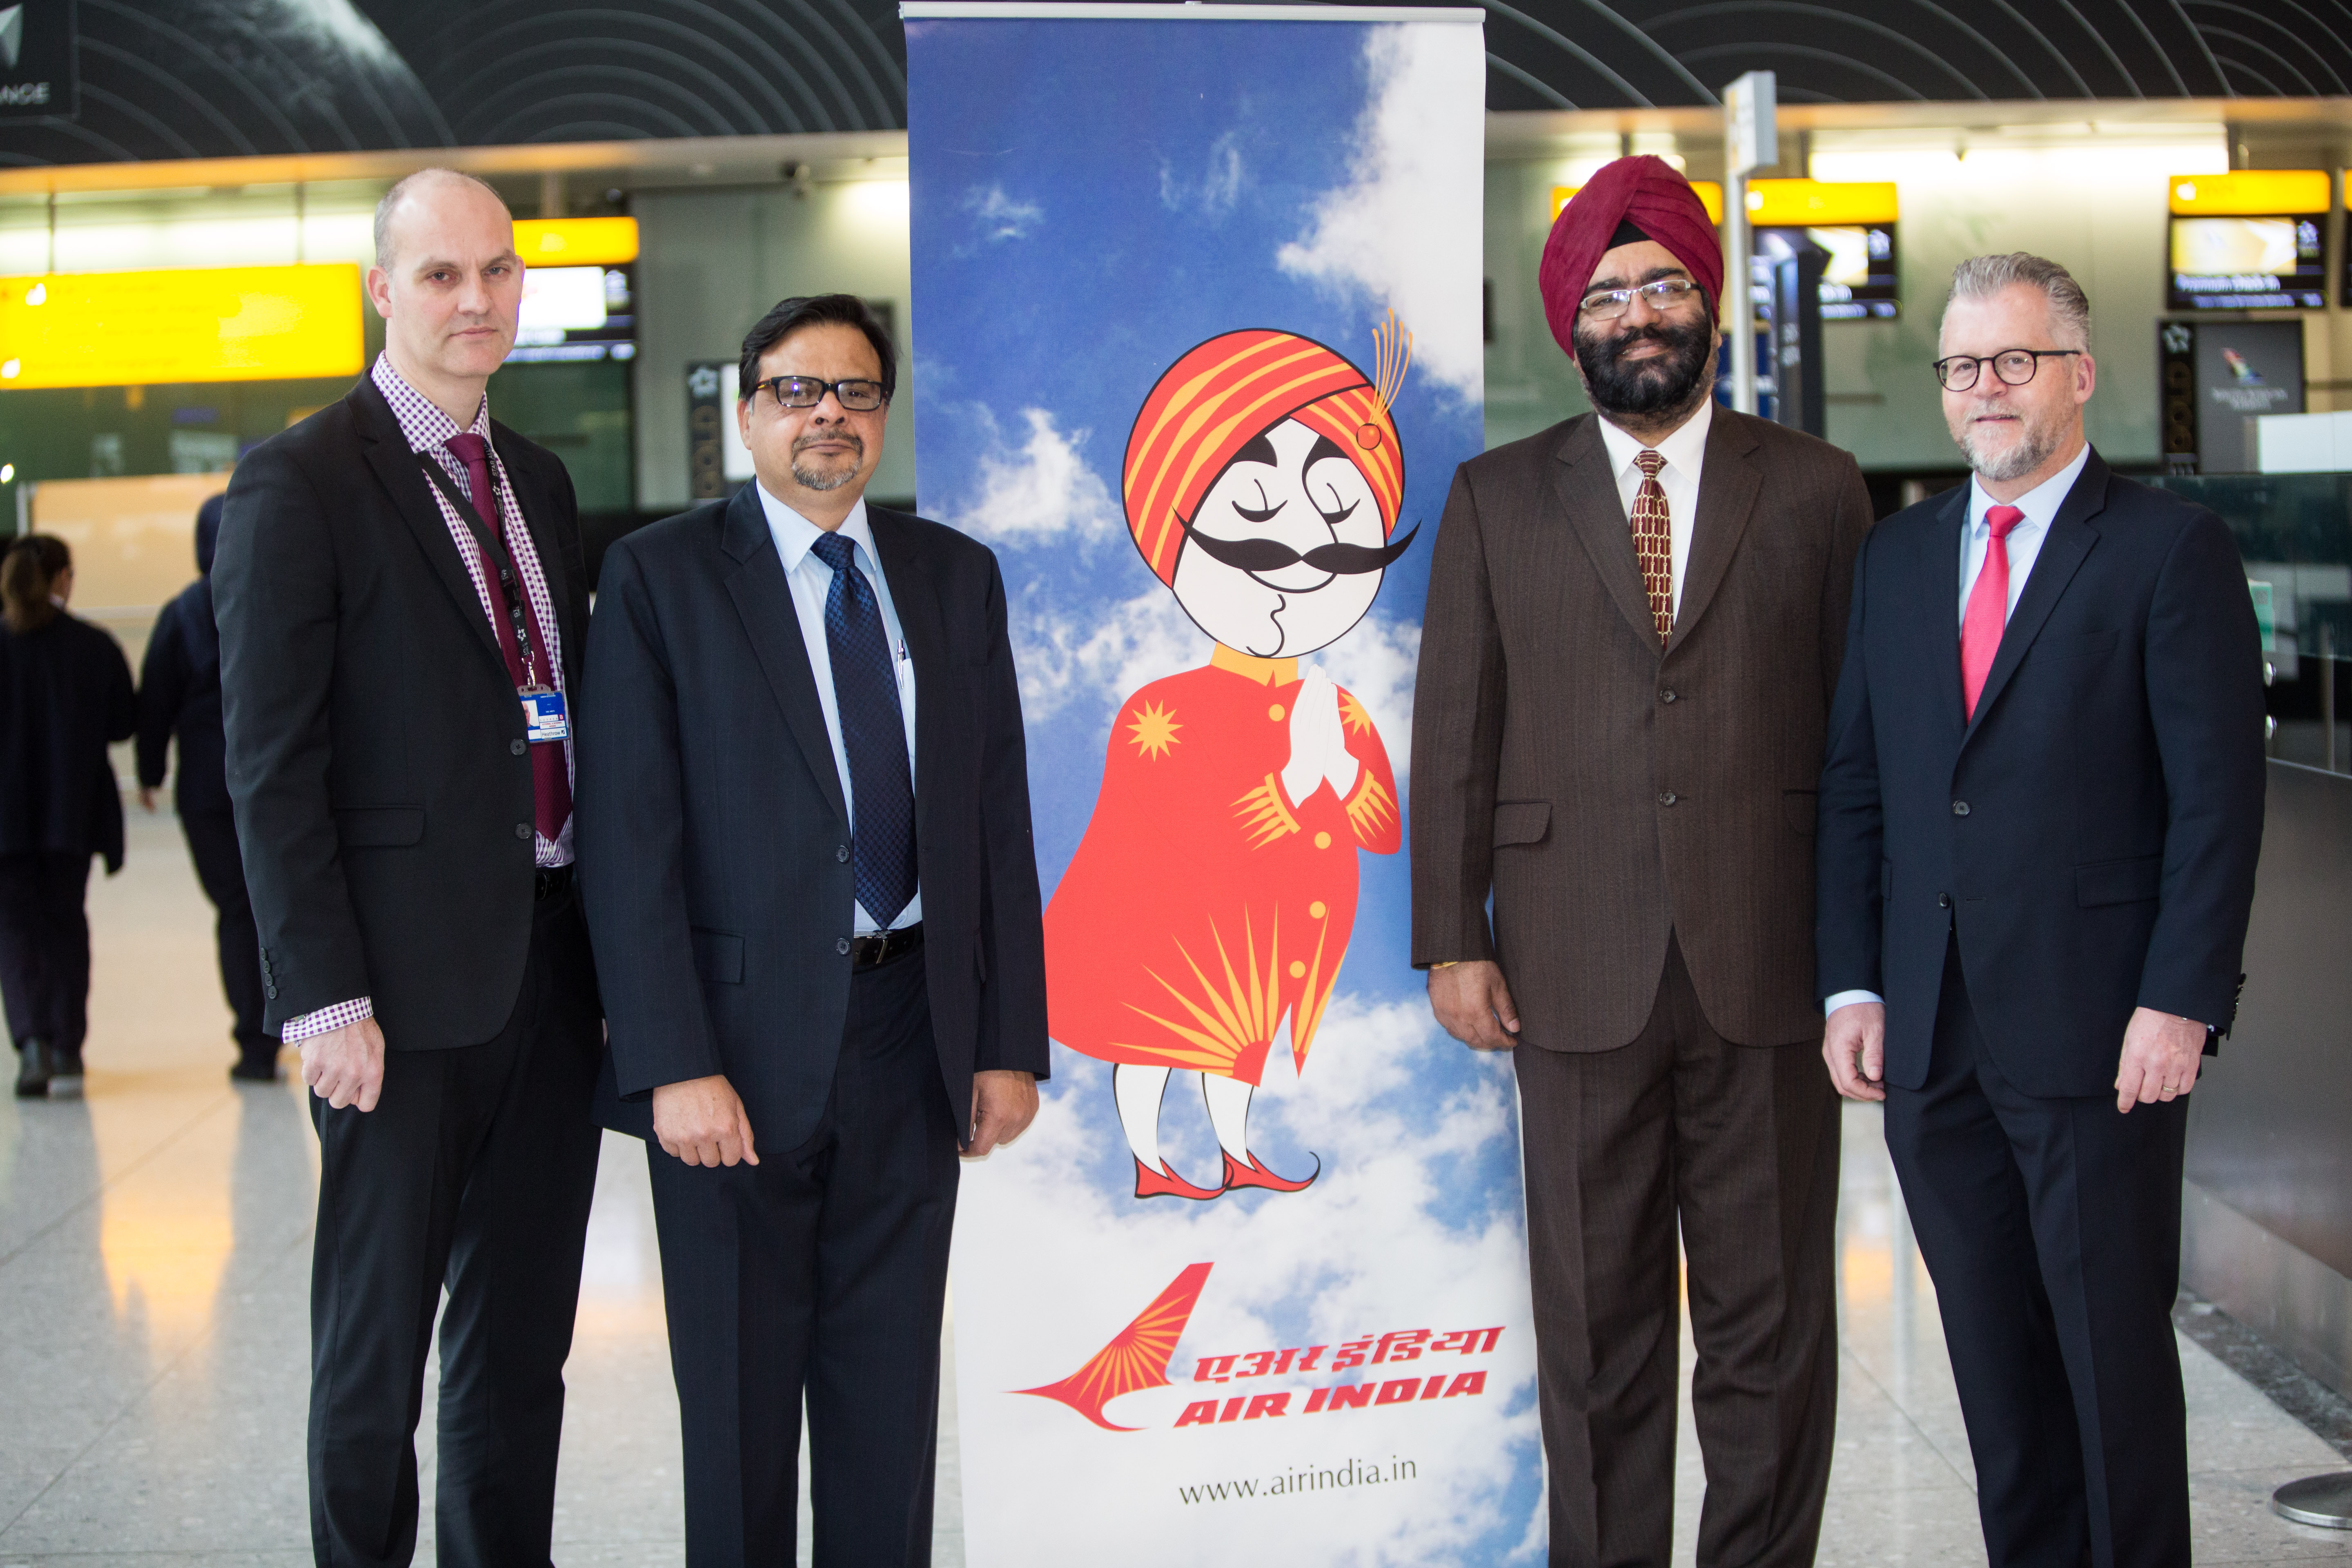 Air India and Star Alliance management celebrating Air India's move to Terminal 2 at Heathrow